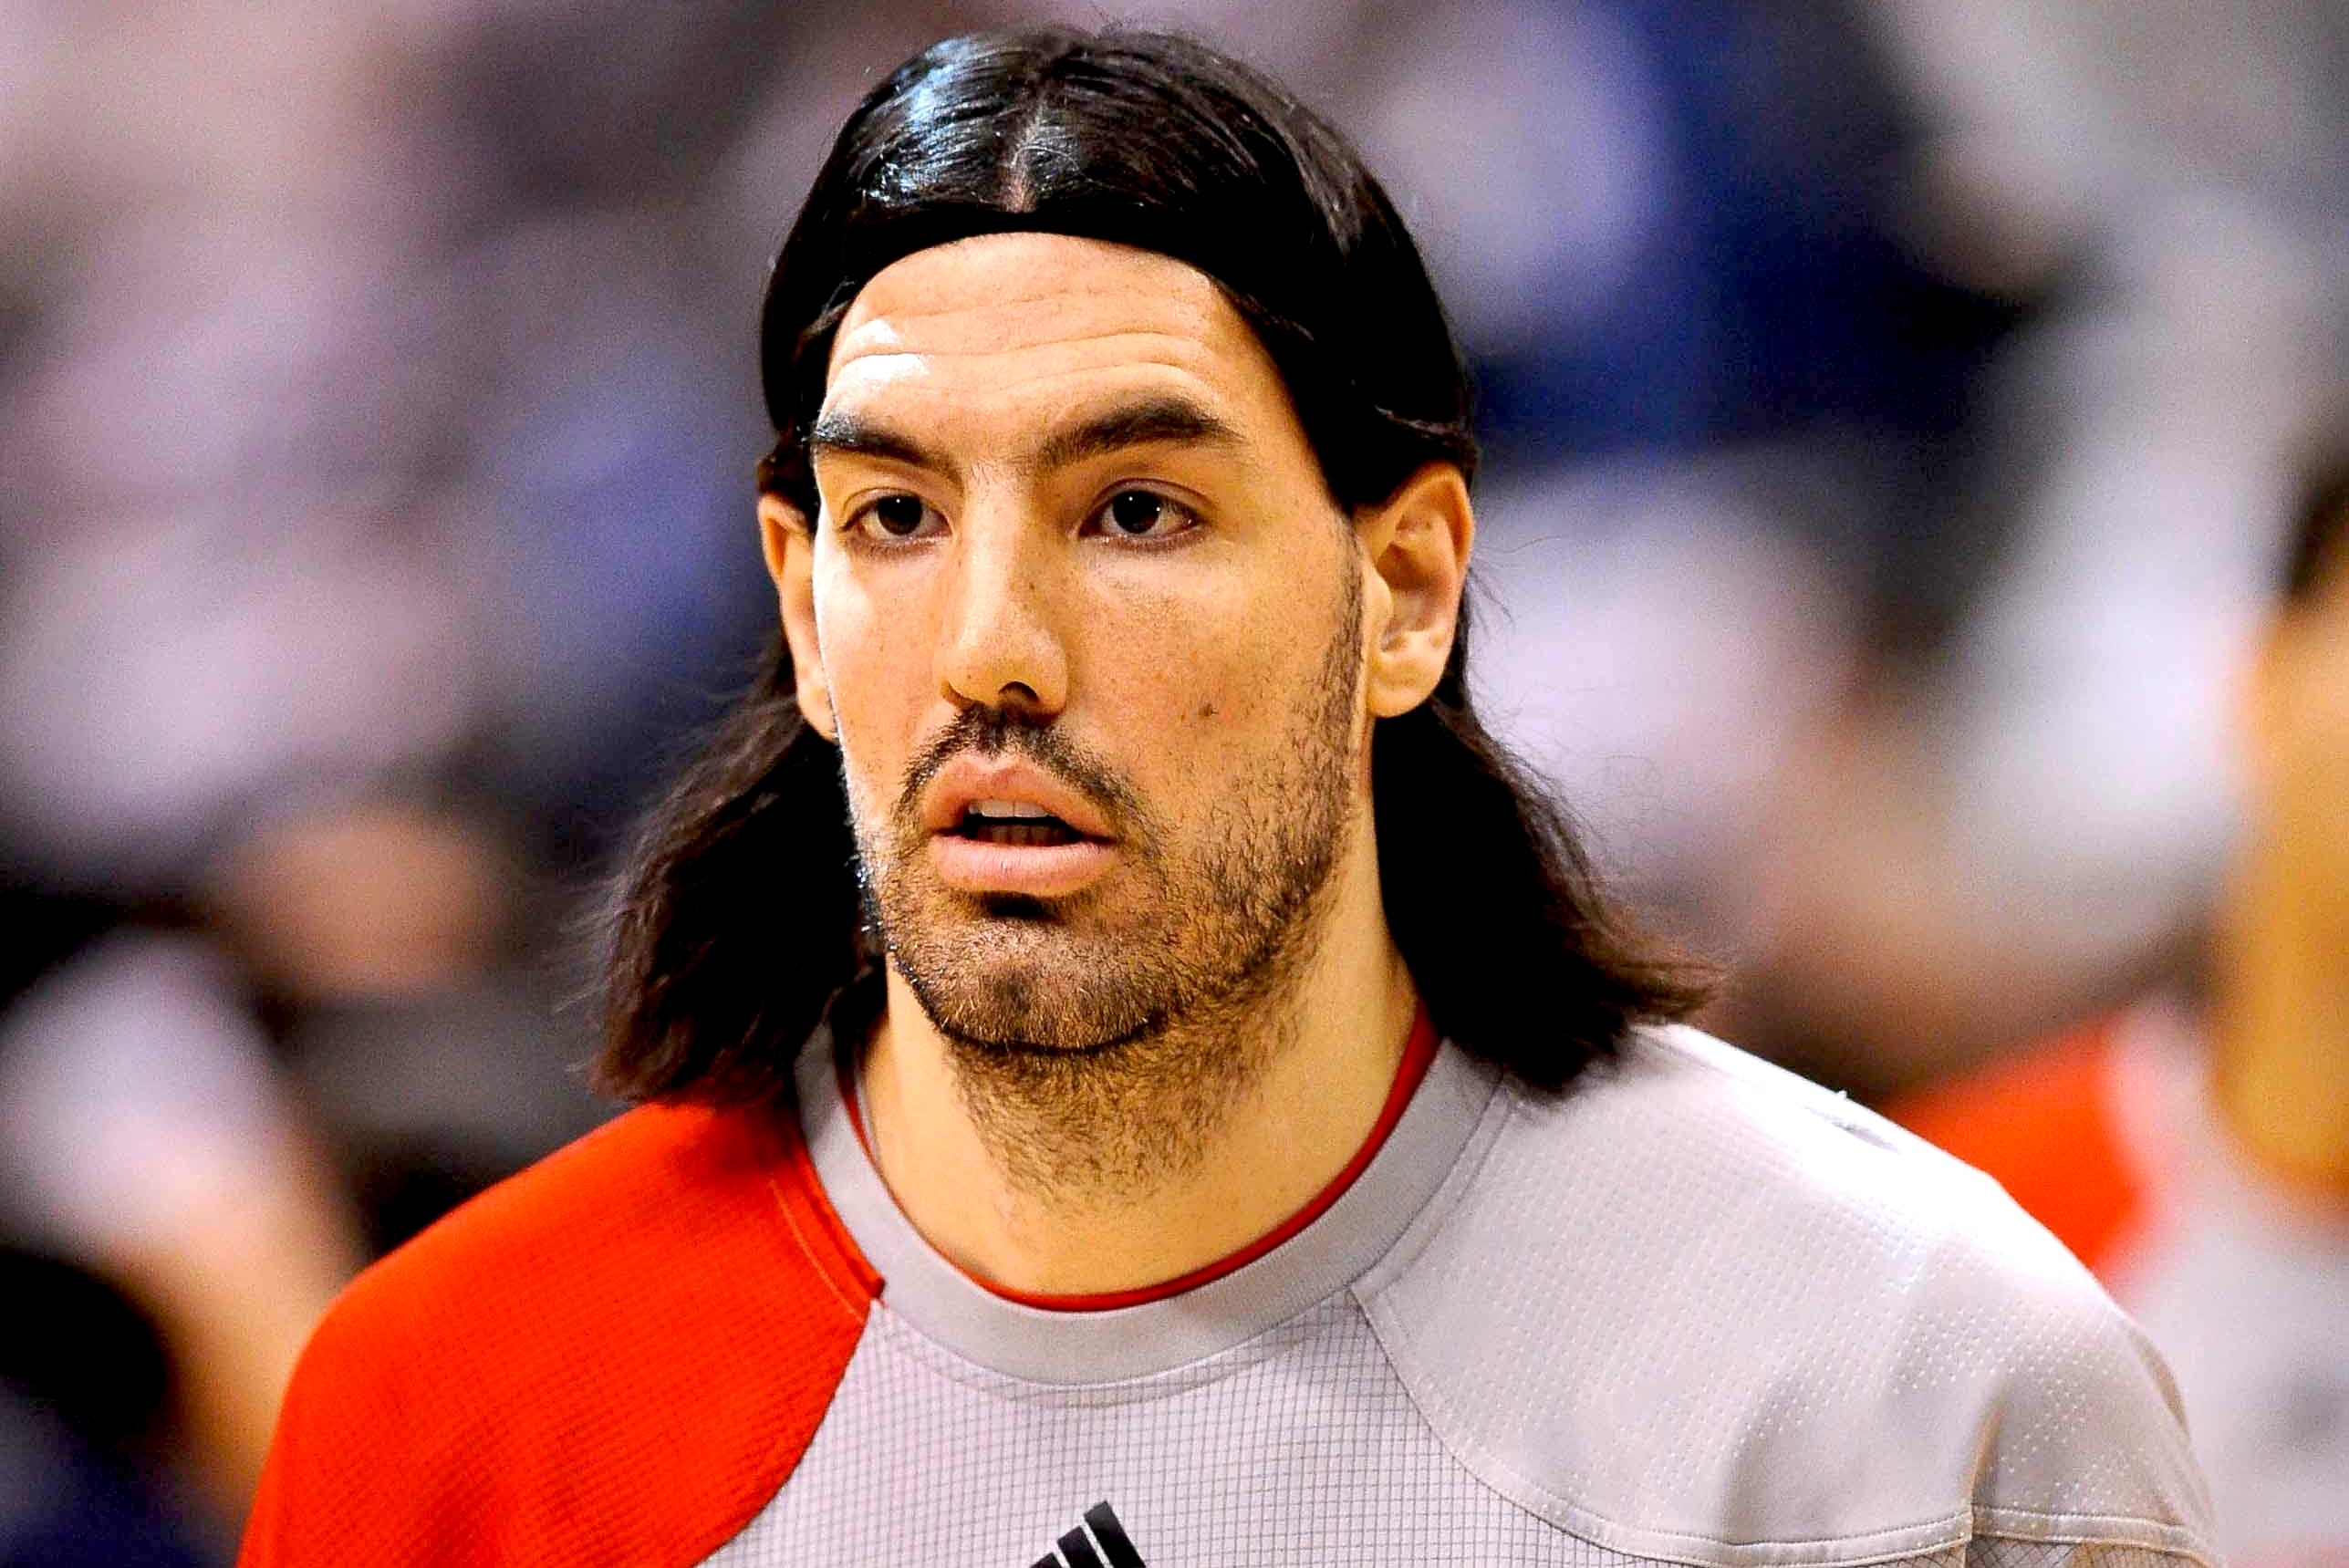 LUIS SCOLA hairstyle one thing to consider when nzcncby - Hair